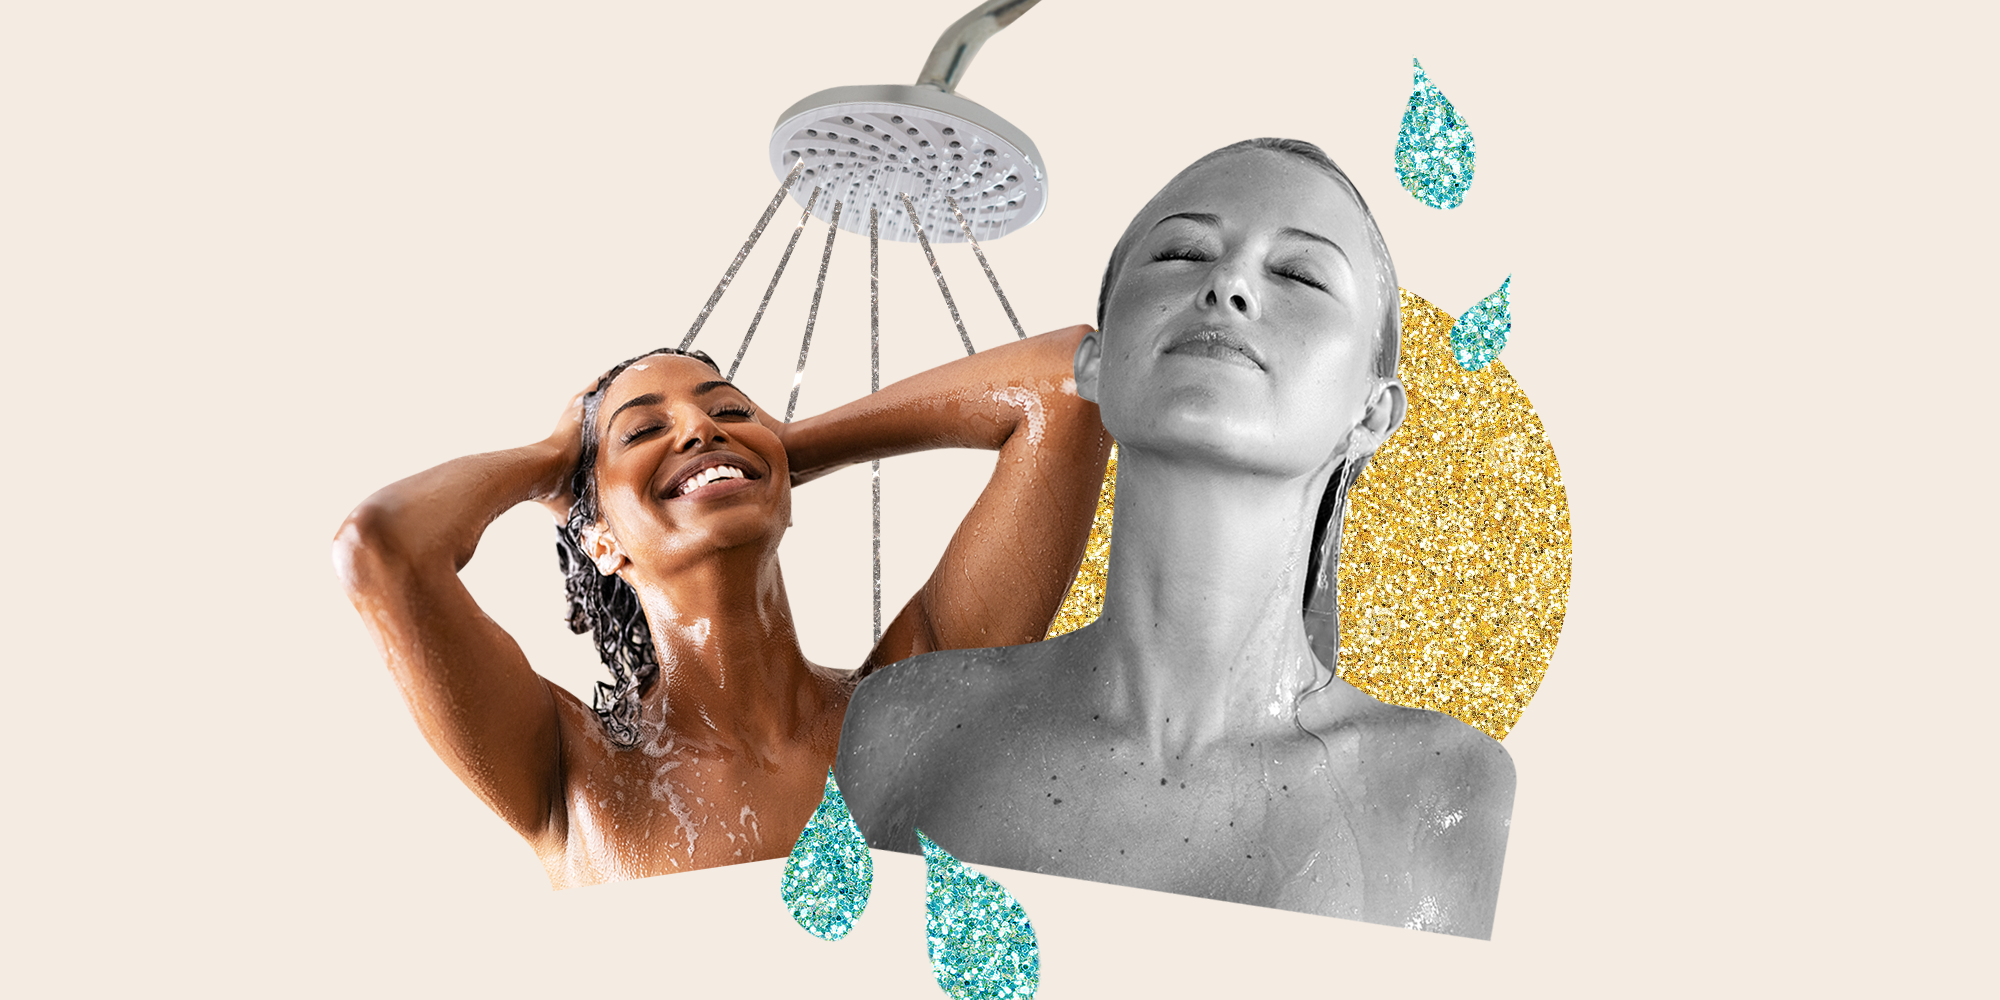 How Often Should You Wash Your Hair According to Experts in 2021